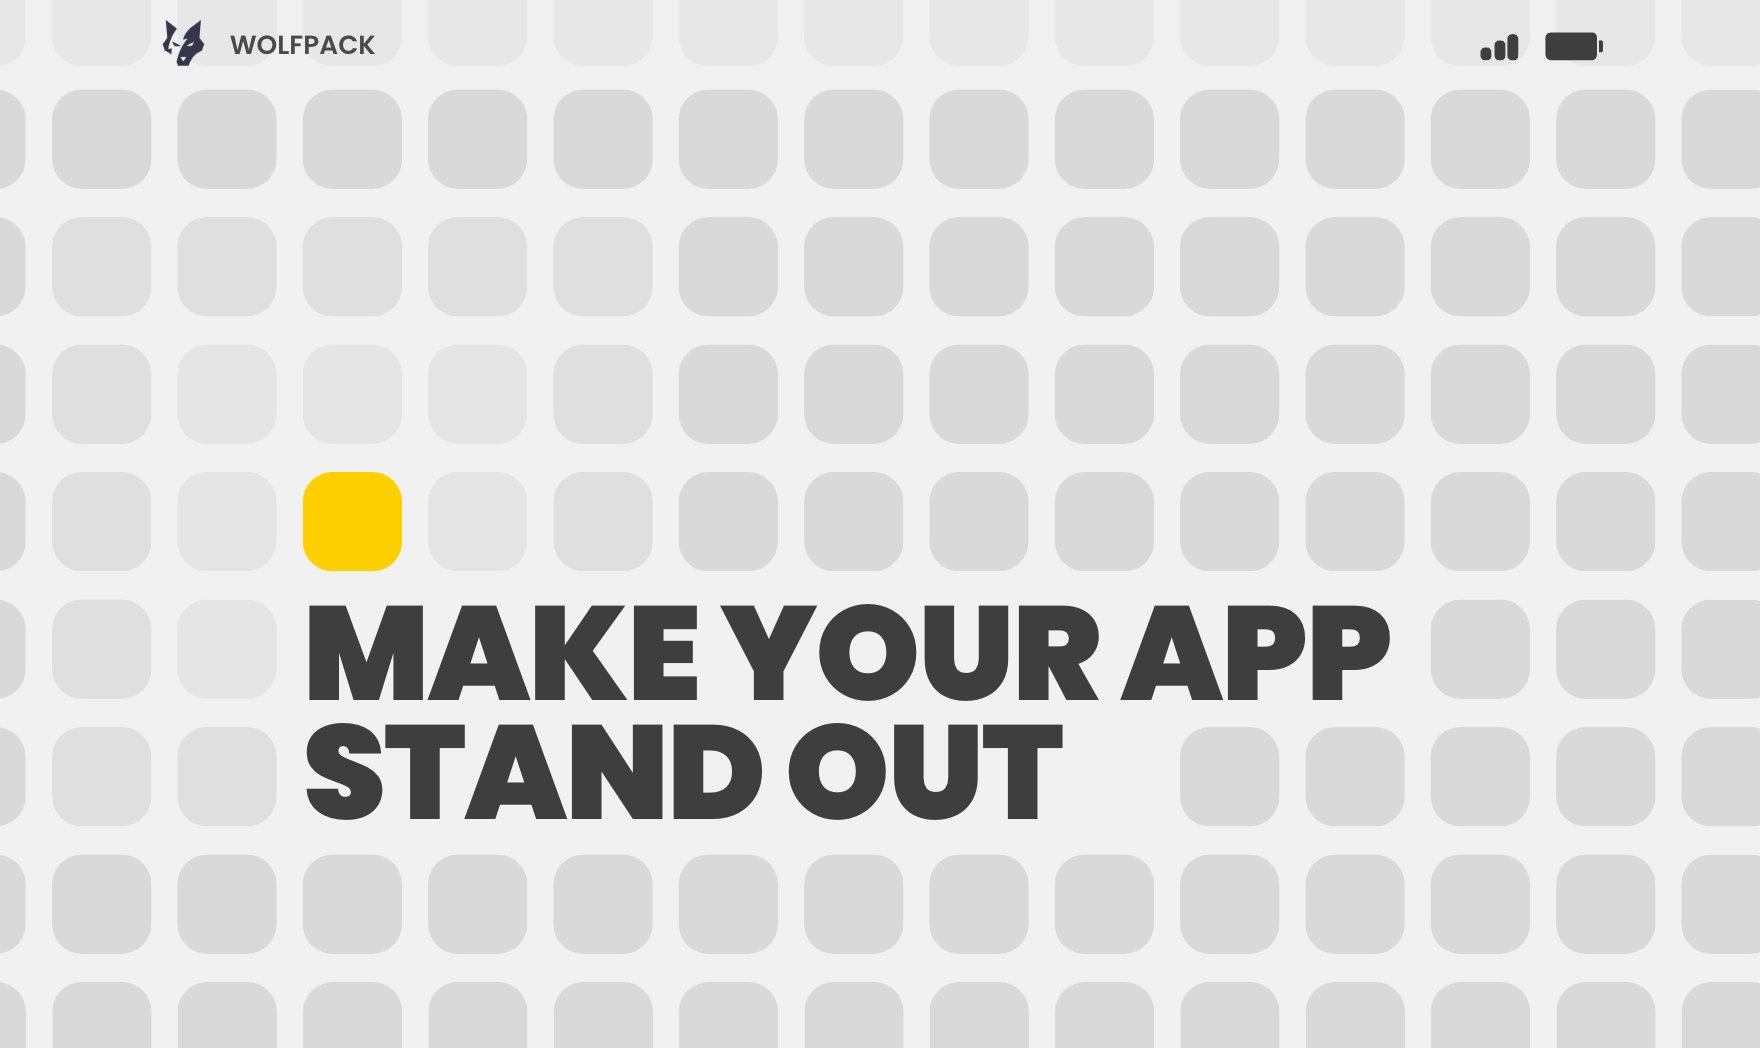 Want to Make Your Mobile App Stand Out? Try These Marketing Tactics